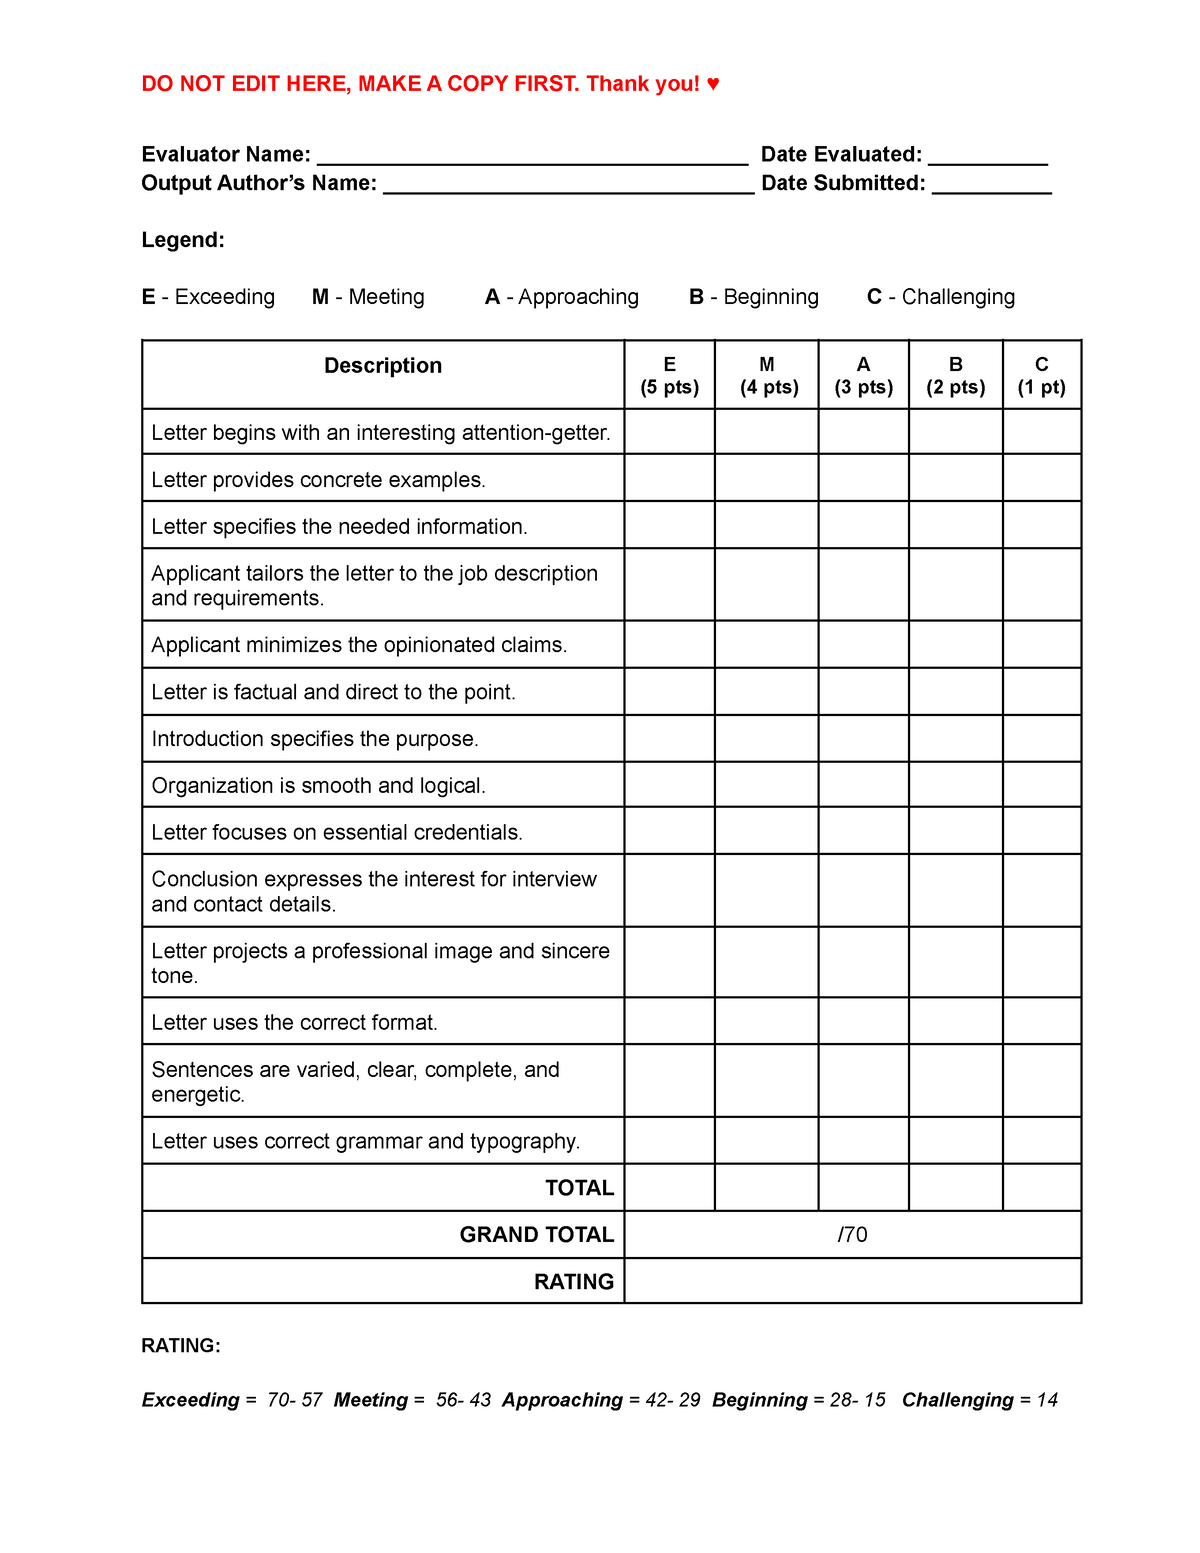 Peer Evaluation Rubric For Assessing a Job Application Letter - DO NOT ...